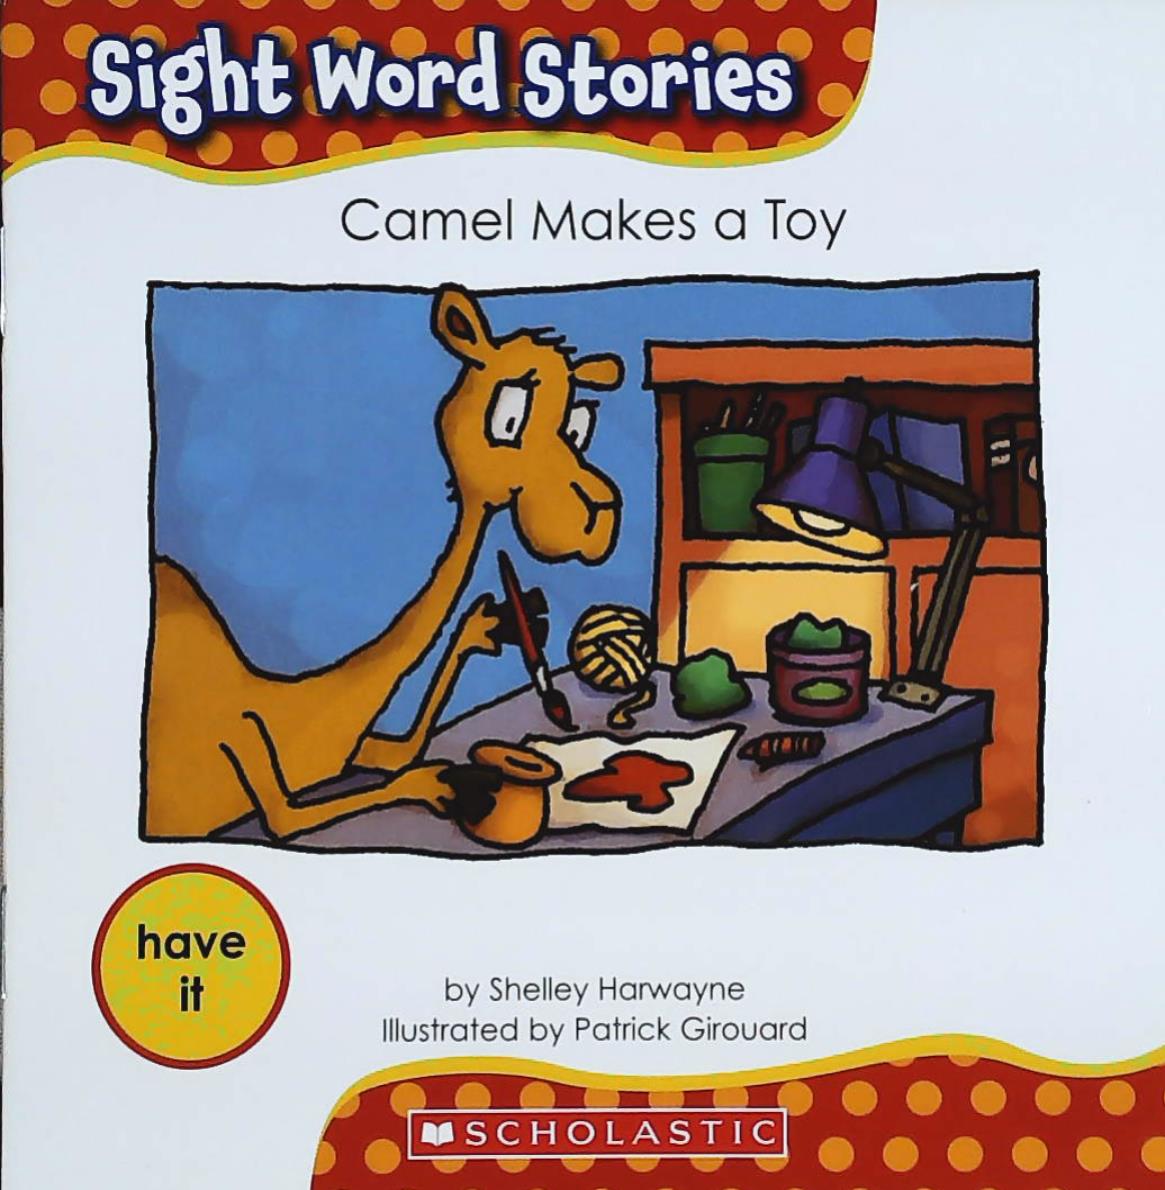 Livre ISBN 0545167590 Sight Word Stories : Camel Makes a Toy (Shelley Harwayne)